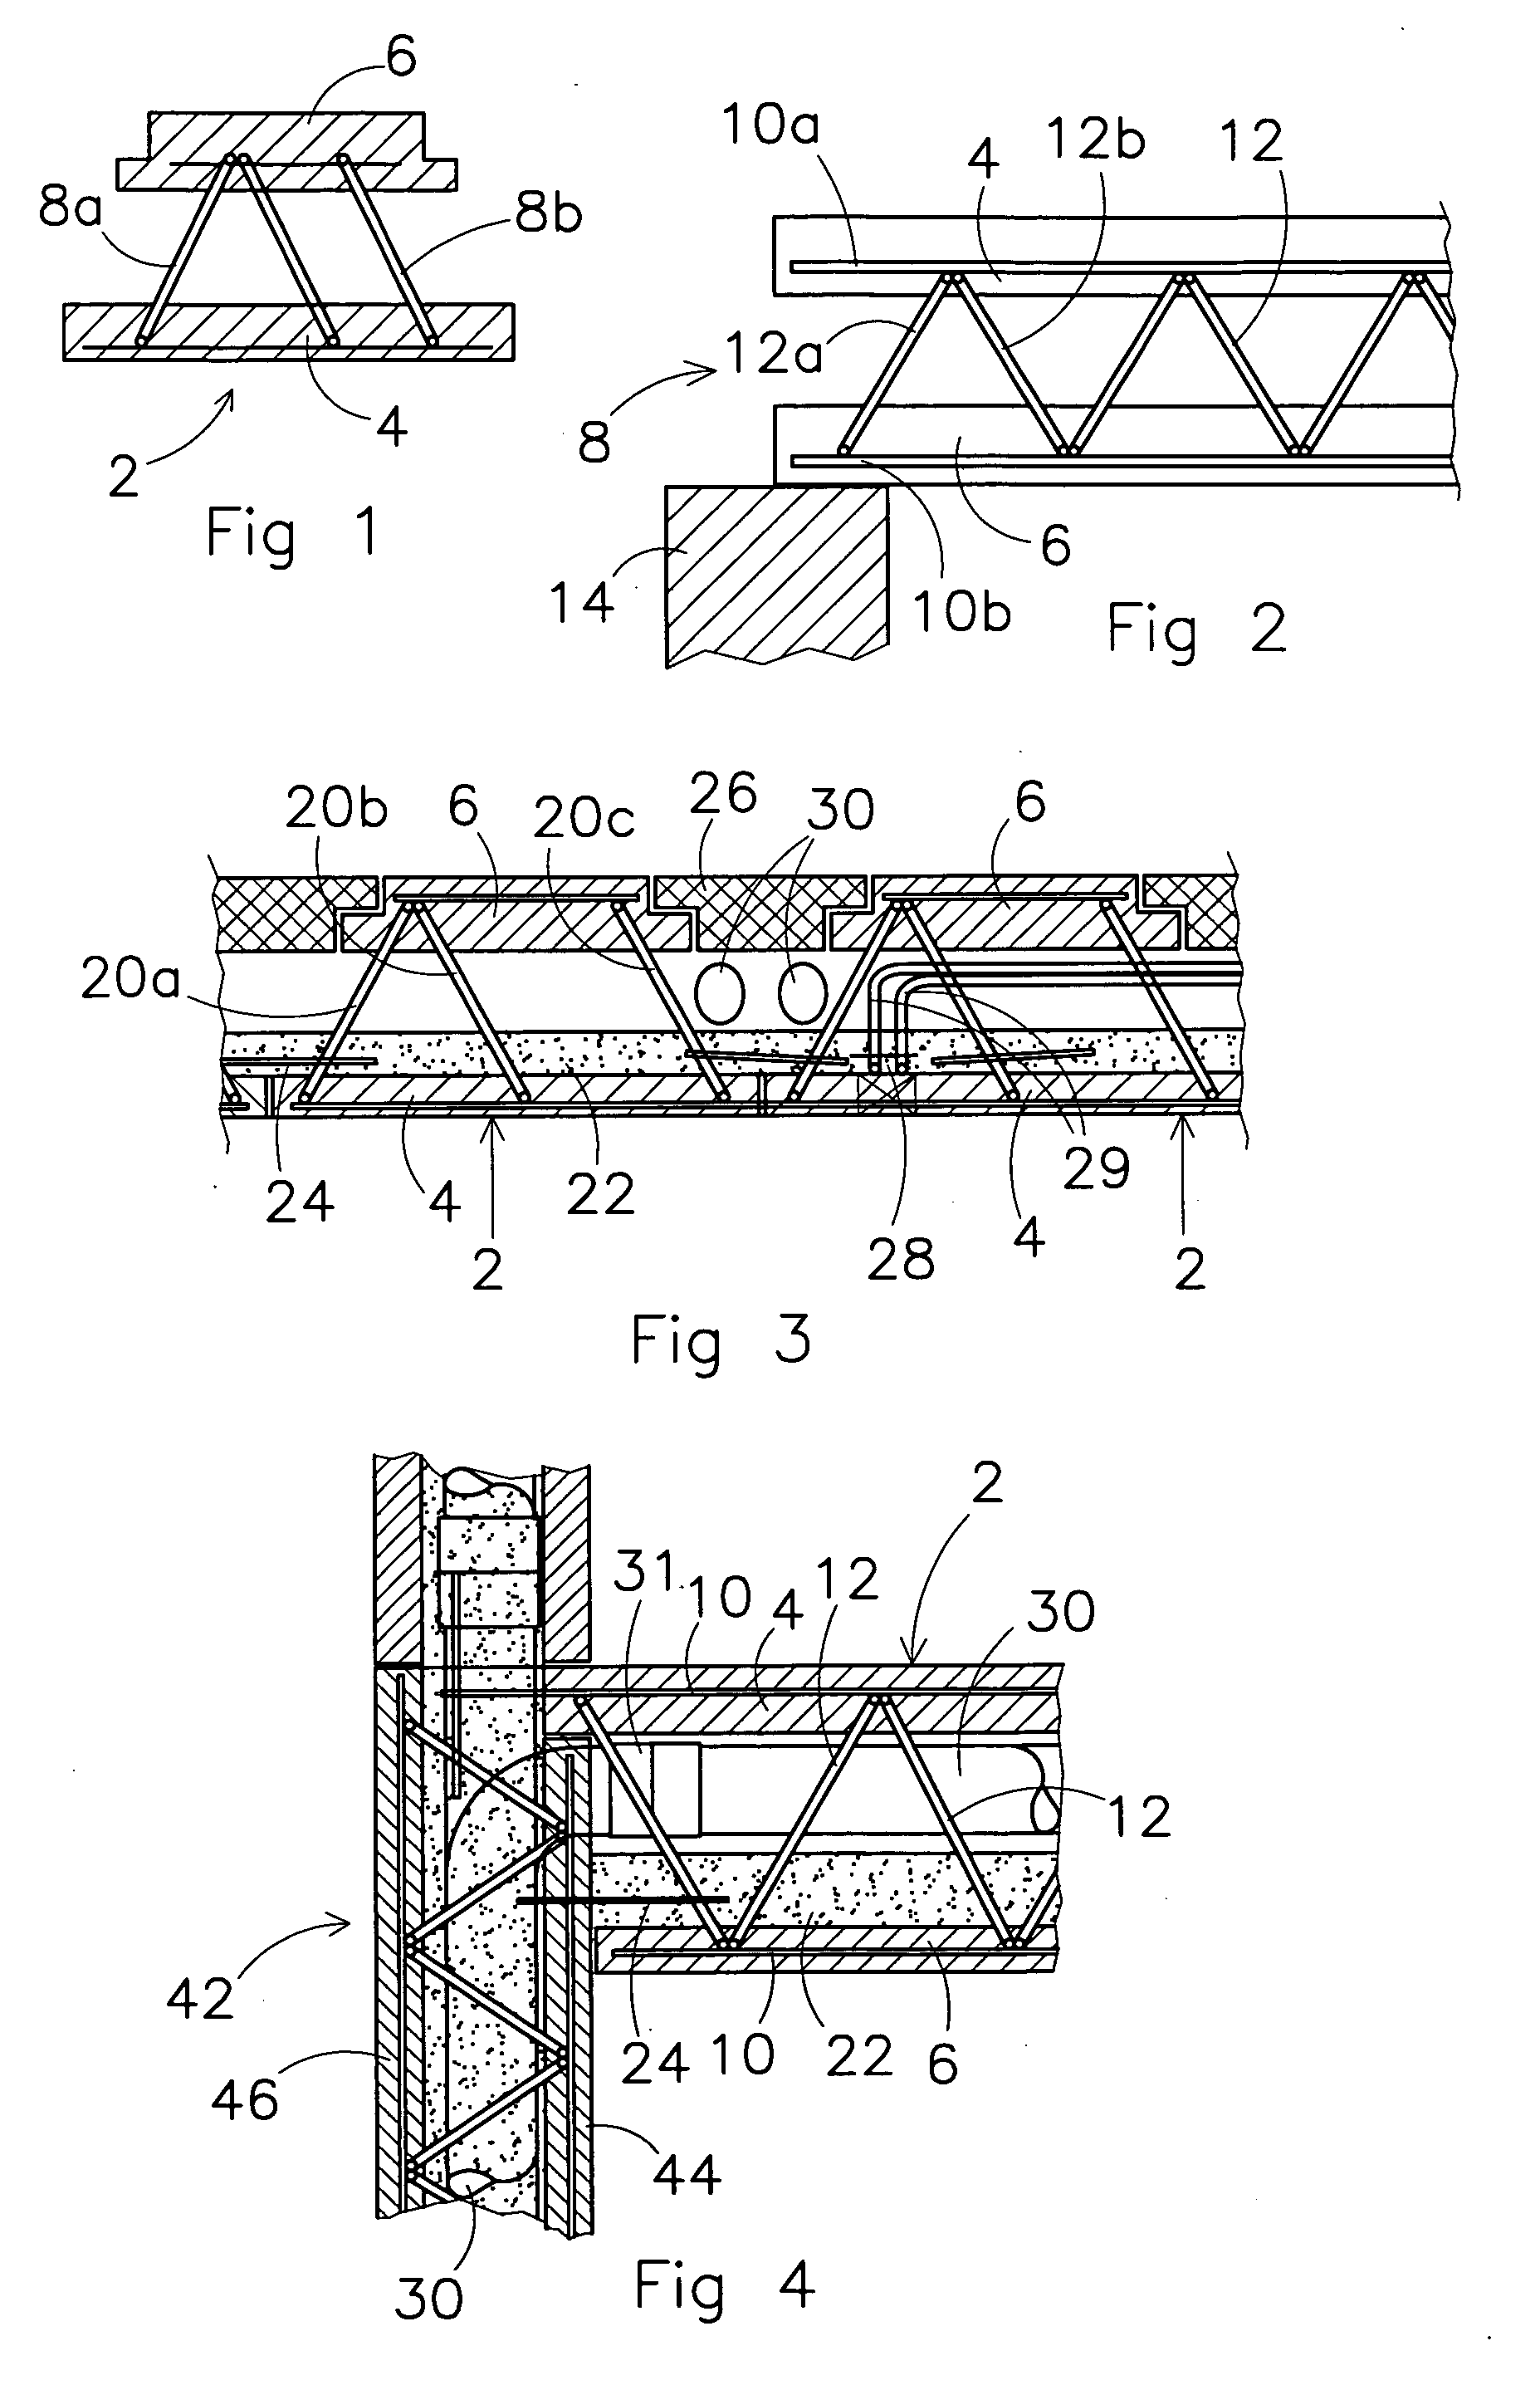 Building system, beam element, column and method